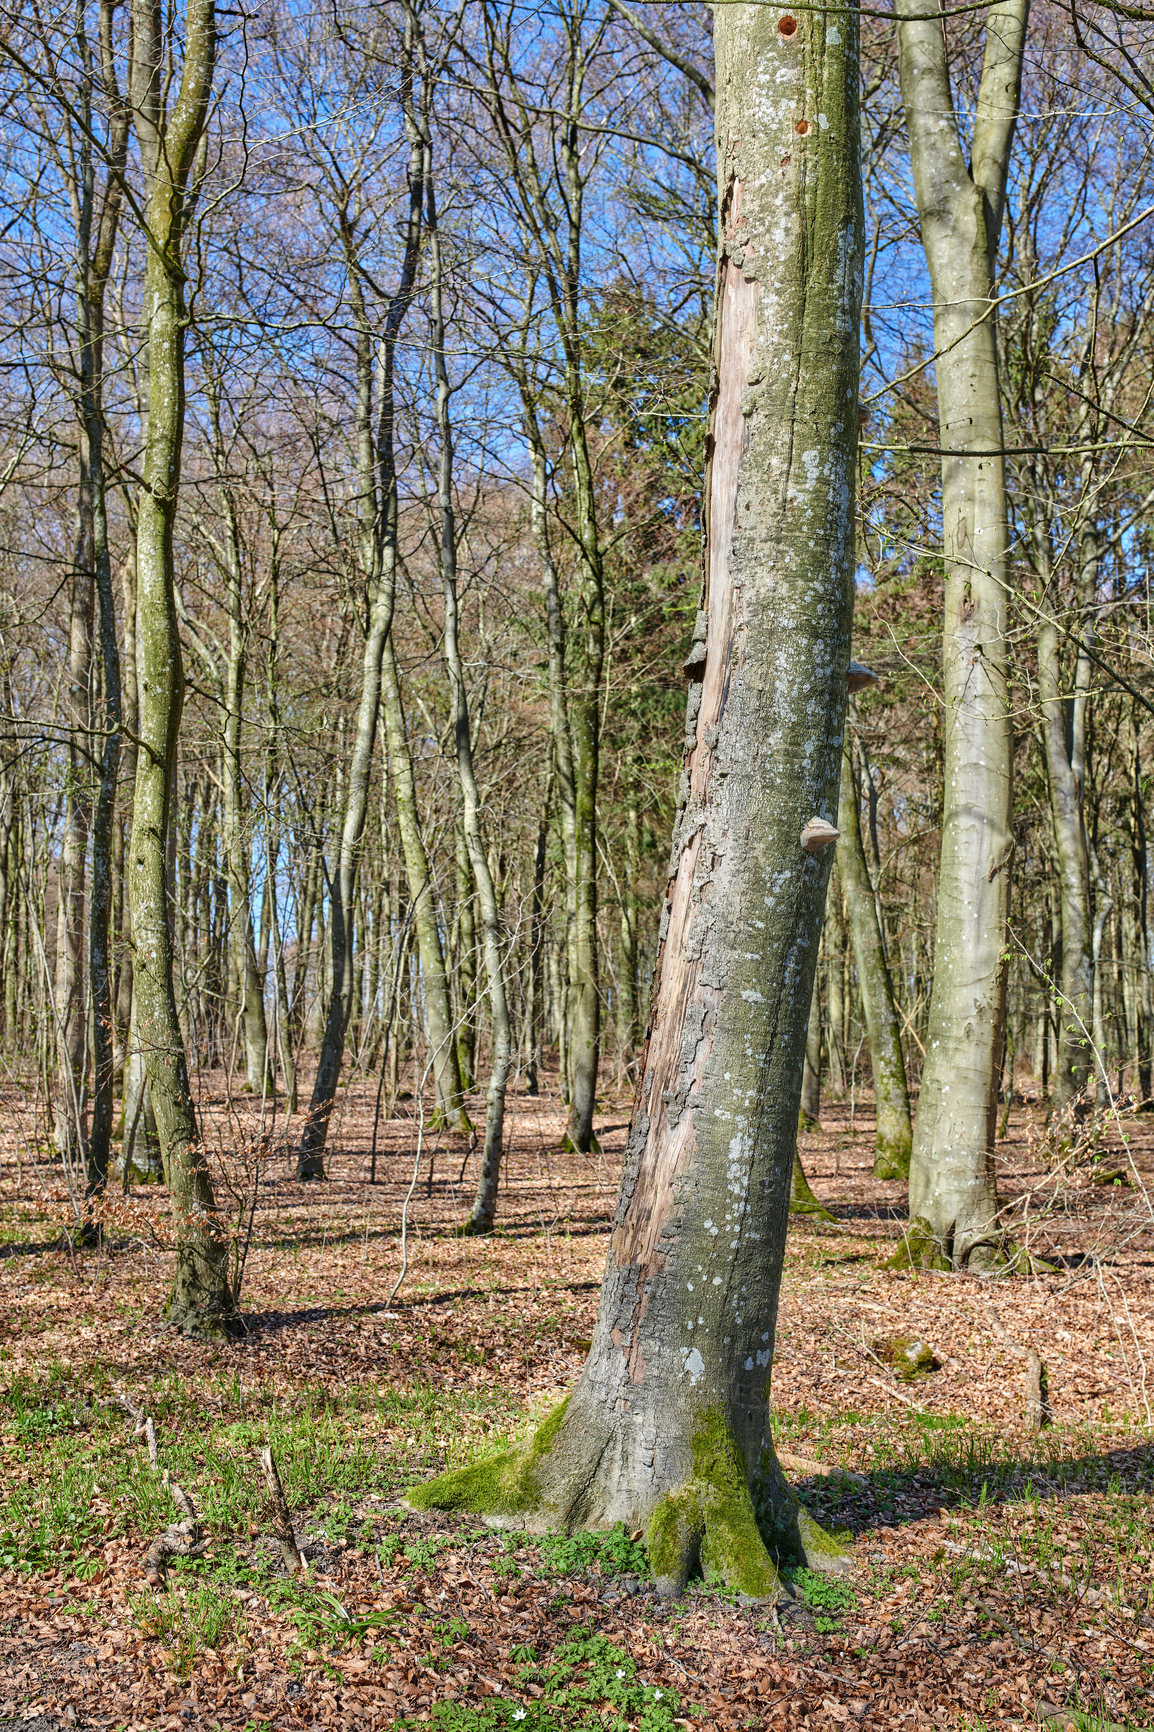 Buy stock photo Leafless trees in a forest with a bit of regrowth developing in early spring. Landscape of lots of tree trunks covered in moss and branches in a wild undisturbed nature environment